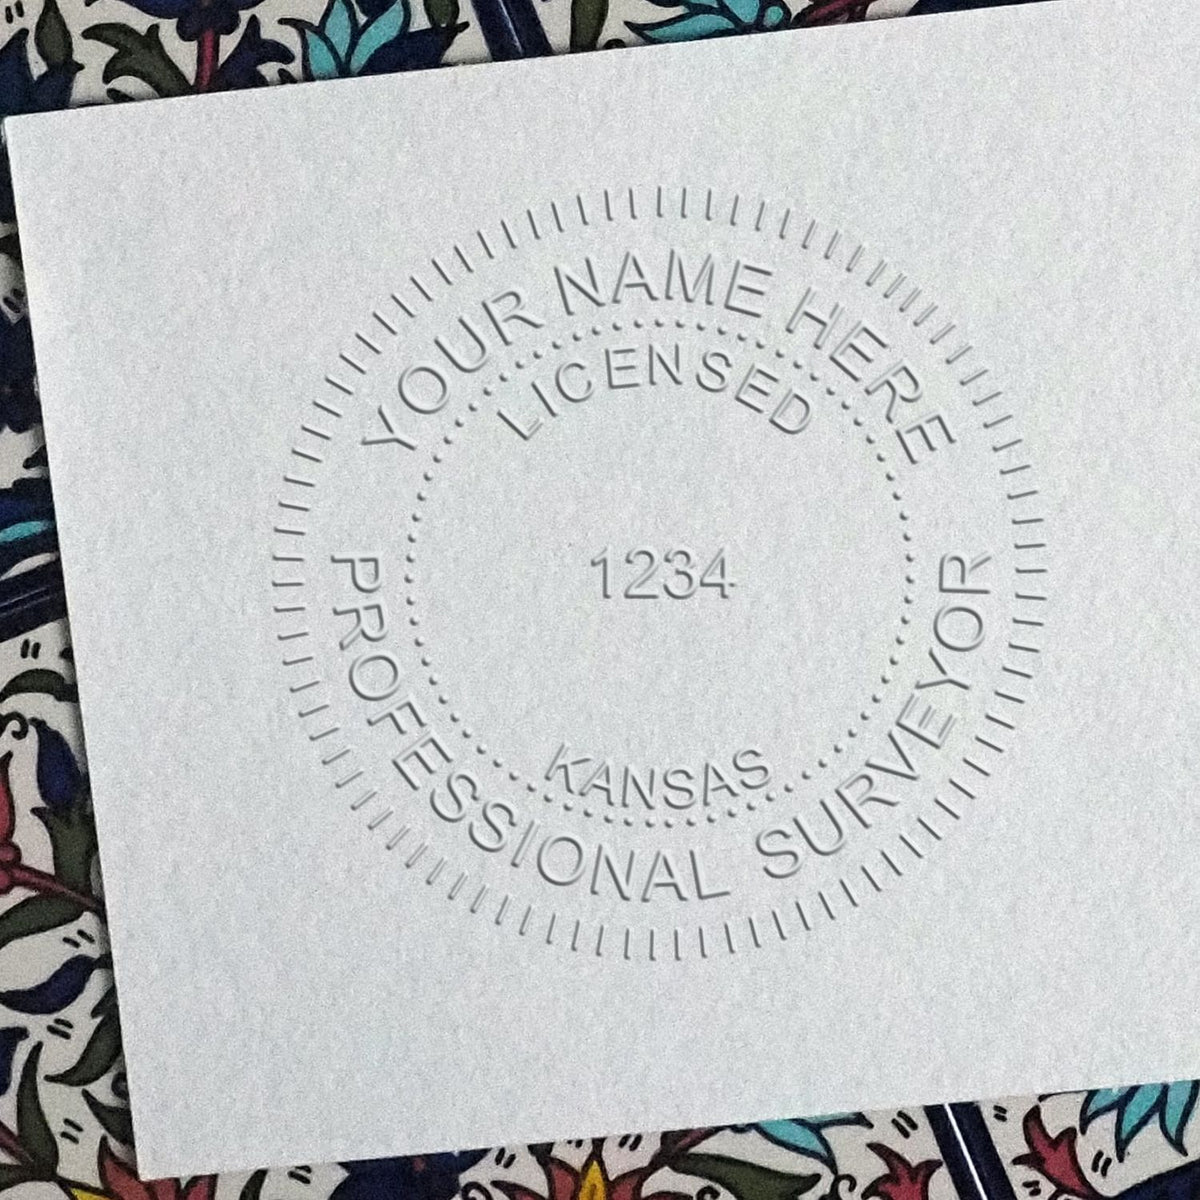 The Long Reach Kansas Land Surveyor Seal stamp impression comes to life with a crisp, detailed photo on paper - showcasing true professional quality.